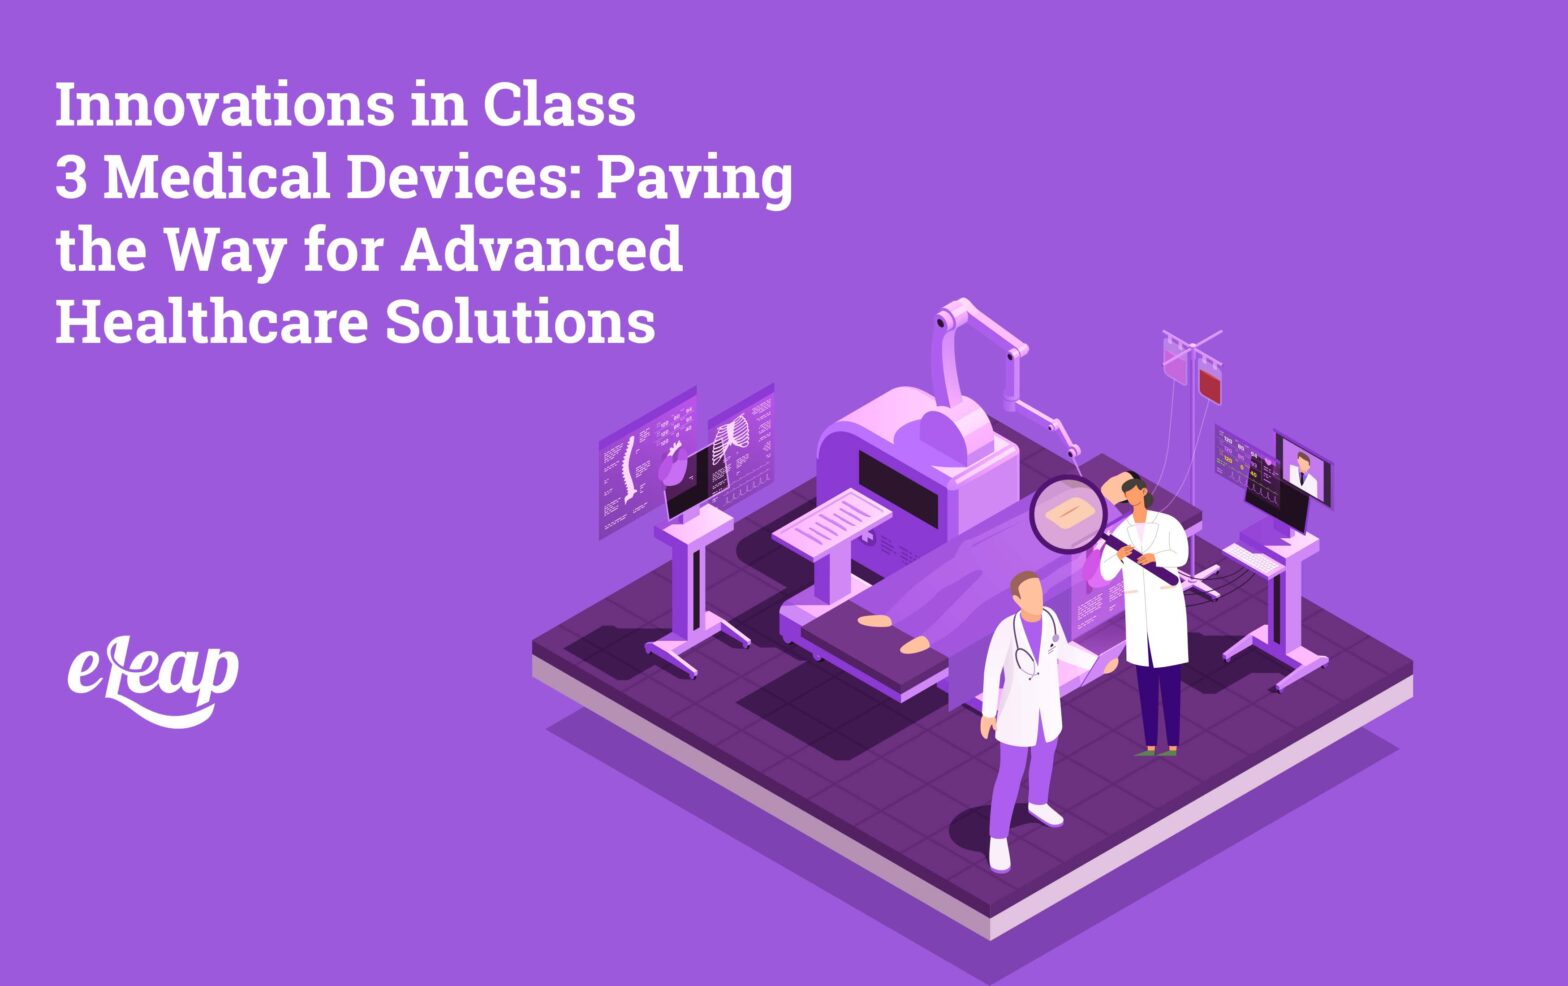 Innovations in Class 3 Medical Devices: Paving the Way for Advanced Healthcare Solutions